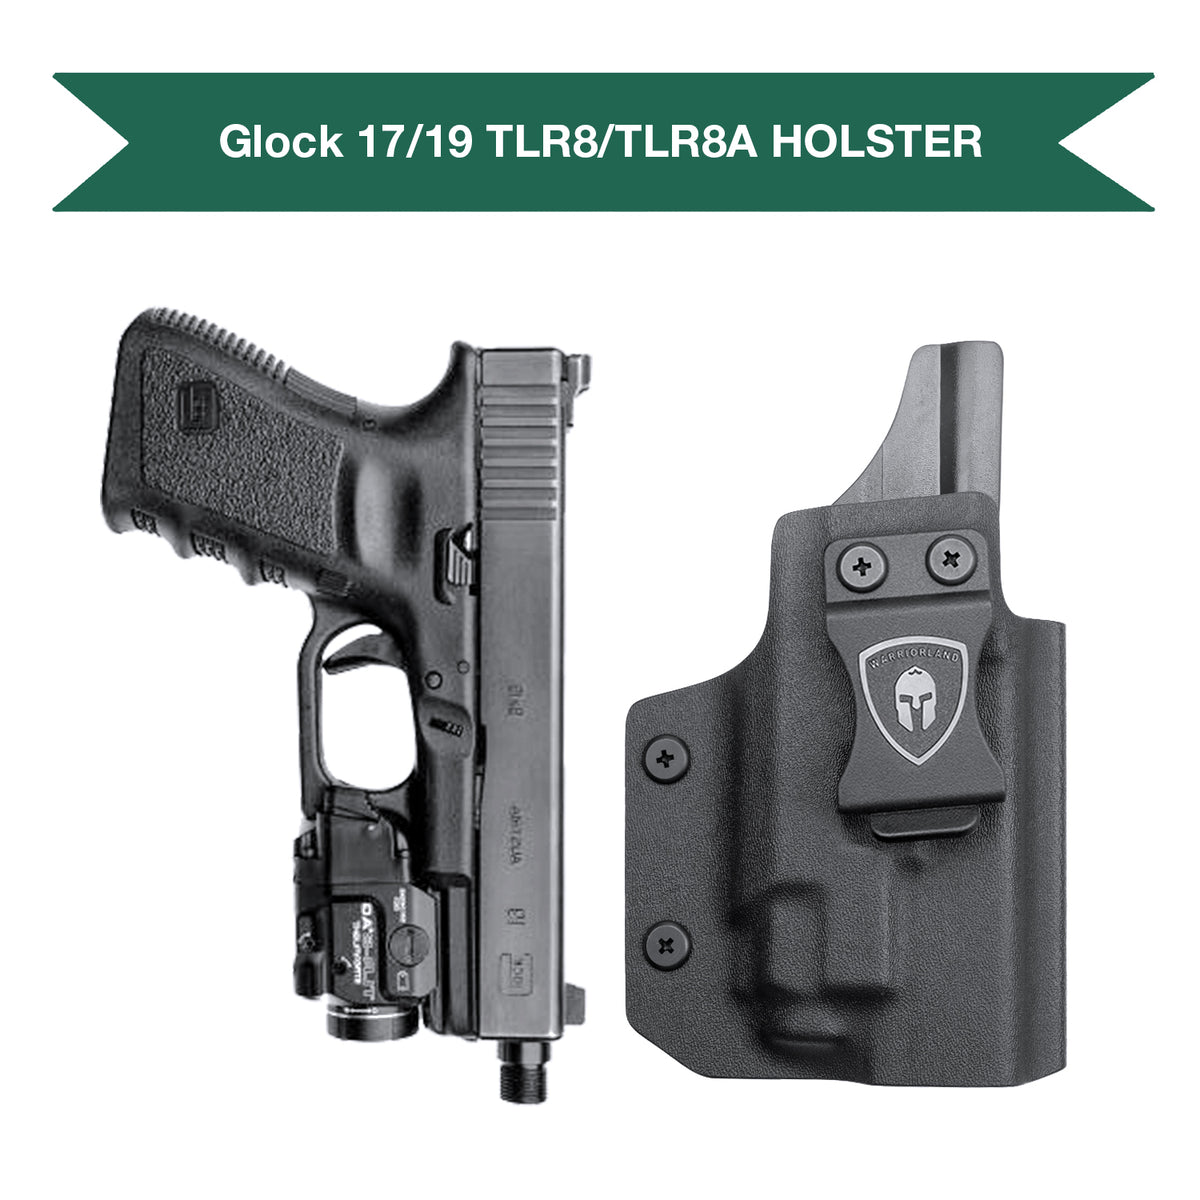 Glock 19 TLR8/TLR8A Holster IWB Kydex Holster Optic Cut Fit: Glock 17 19 19X 44 45 Gen 3-5 & Glock 23 32 Gen 3-4 TLR-8/TLR-8A, Inside Waistband Conceal Carry, Adj Retention, Right Hand | WARRIORLAND